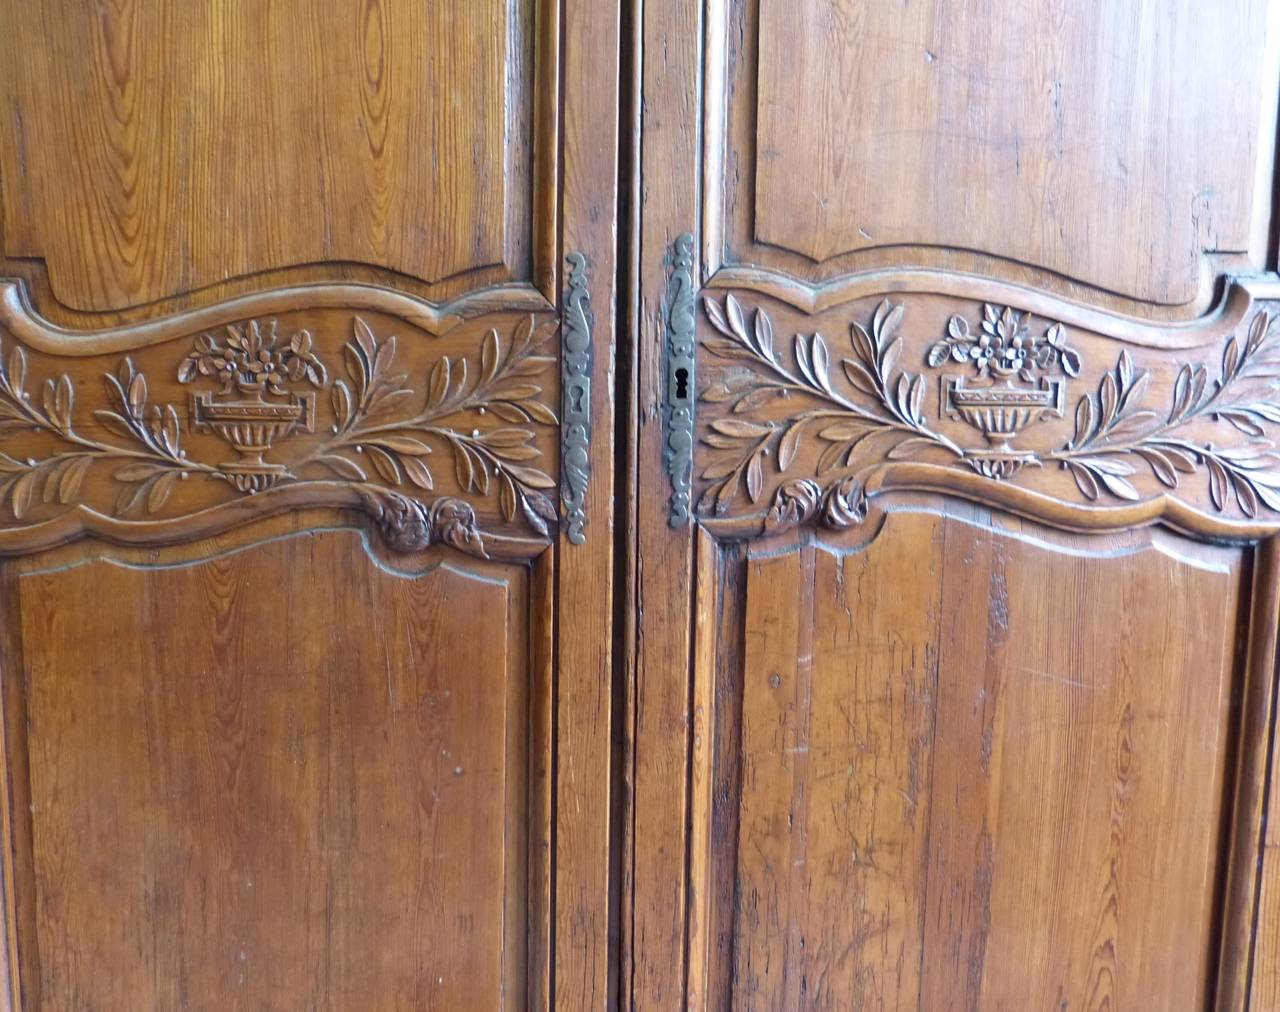 A stained pine 18th century armoire with carved decoration of vines to upper part of doors and a still life carved design to central part of the doors. The interior fitted with shelves. Depth with cornice is 56 inches, circa 1790.